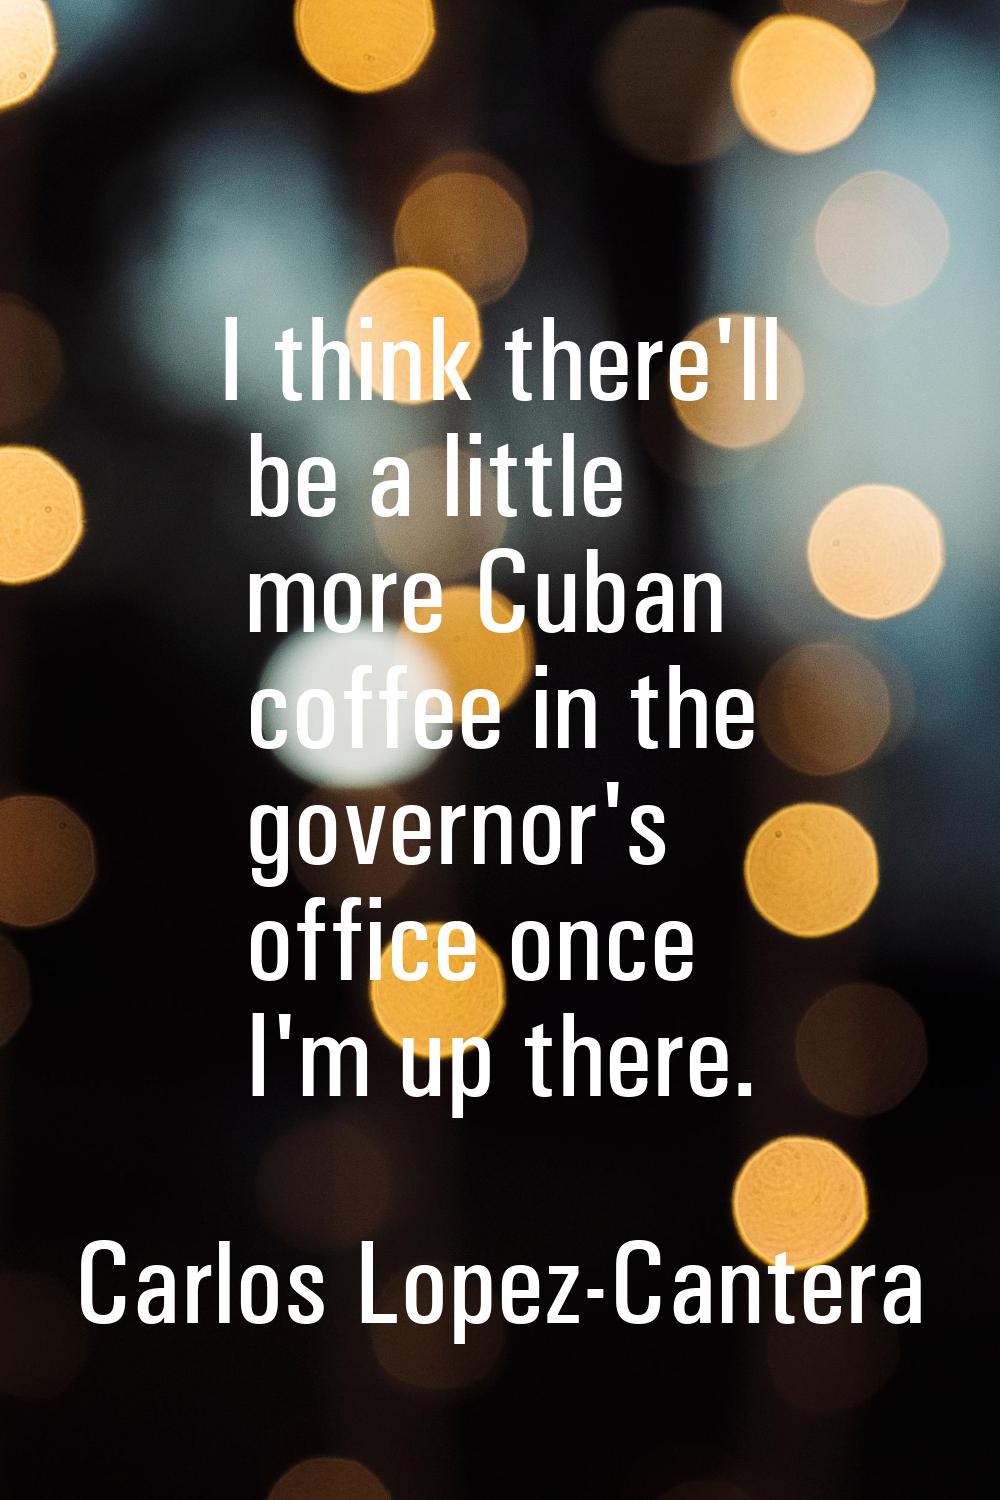 I think there'll be a little more Cuban coffee in the governor's office once I'm up there.